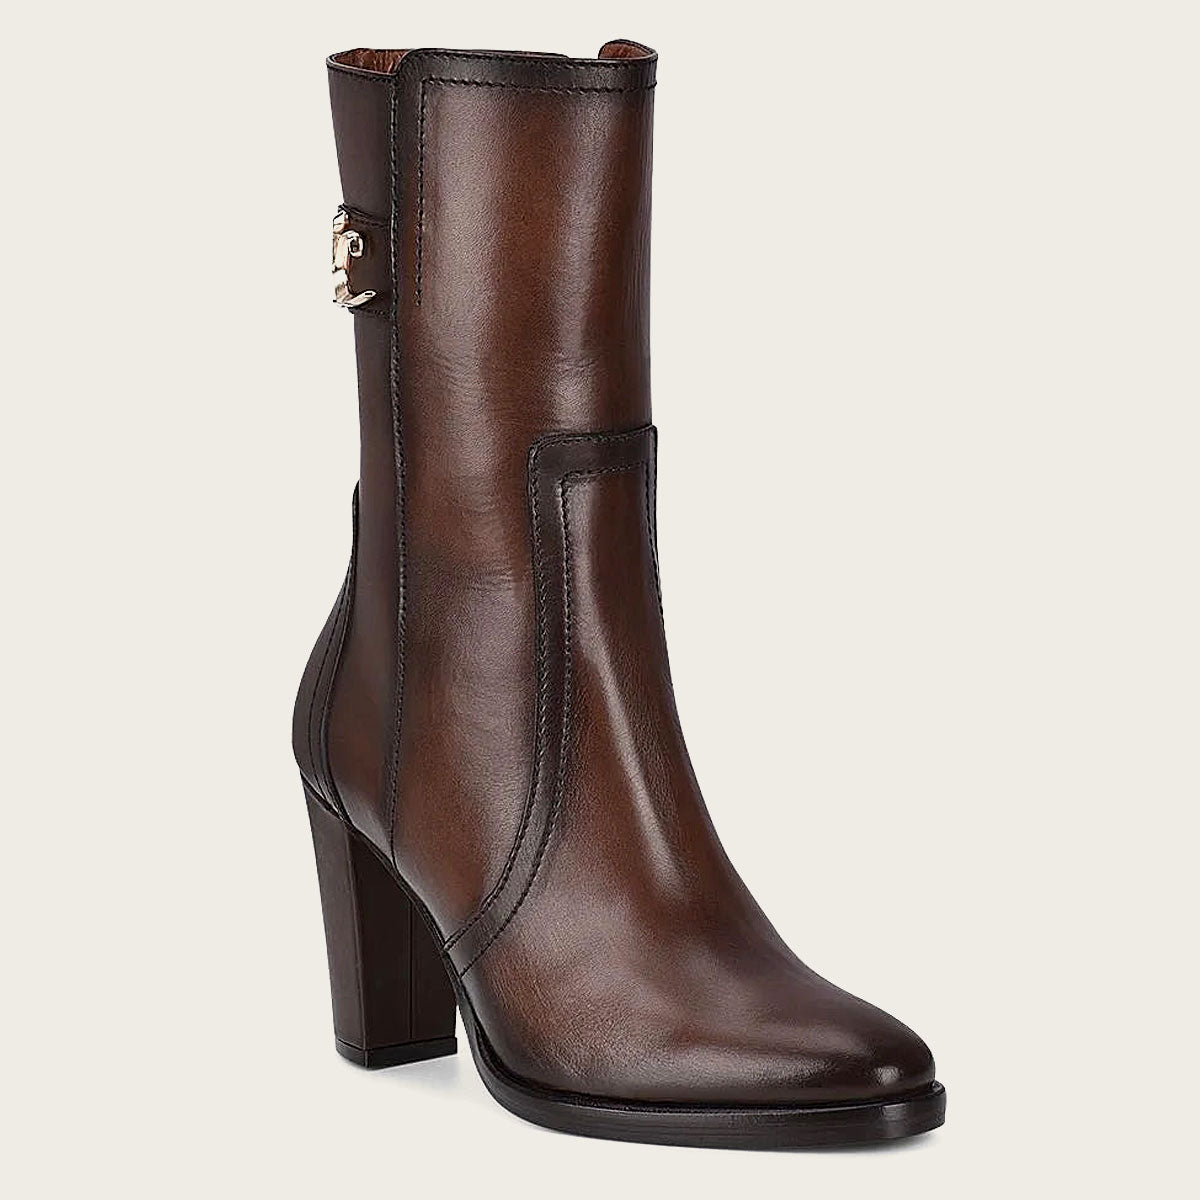 Brown leather bootie with metallic symbol on side. Smooth, polished leather, block heel, high ankle shaft, intricate design.